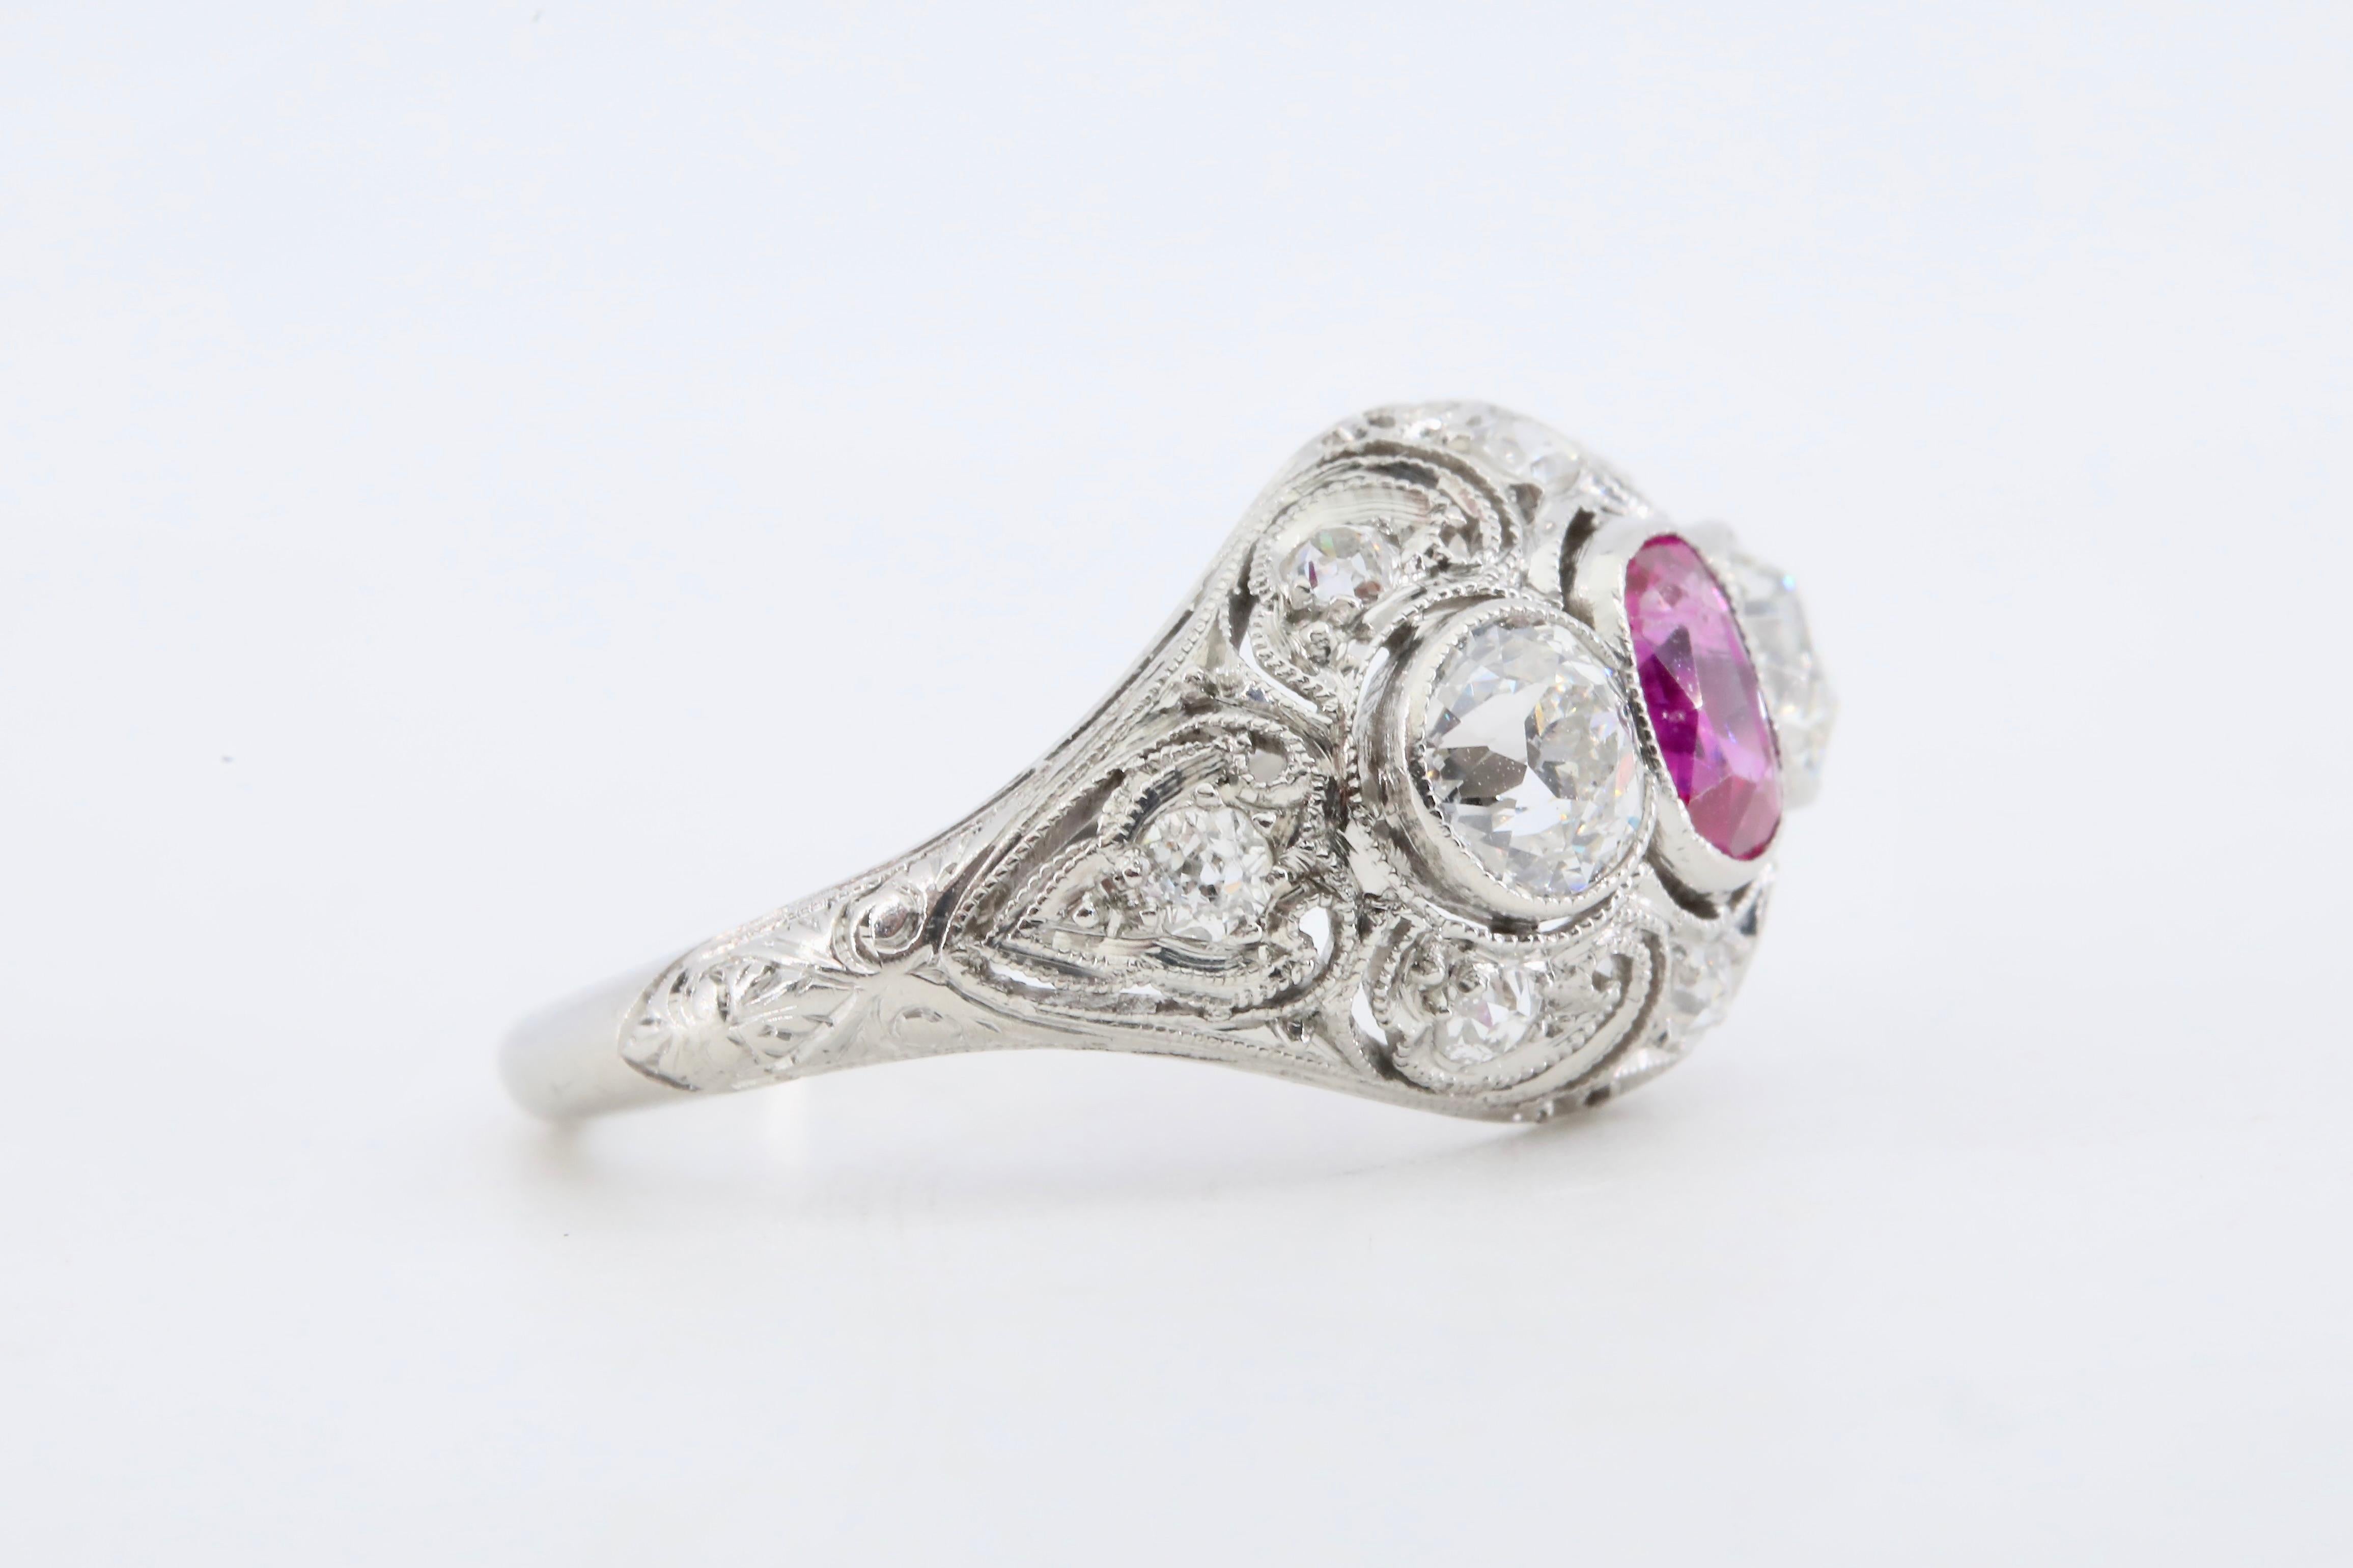 An Edwardian period No Heat Burmese Ruby, and diamond ring in platinum.

Centered by a bezel set old cushion cut ruby of Burma origin with no heat treatment.  The ruby of rich purplish red color with fine clarity and weighing 1.05 carats.

Framed by